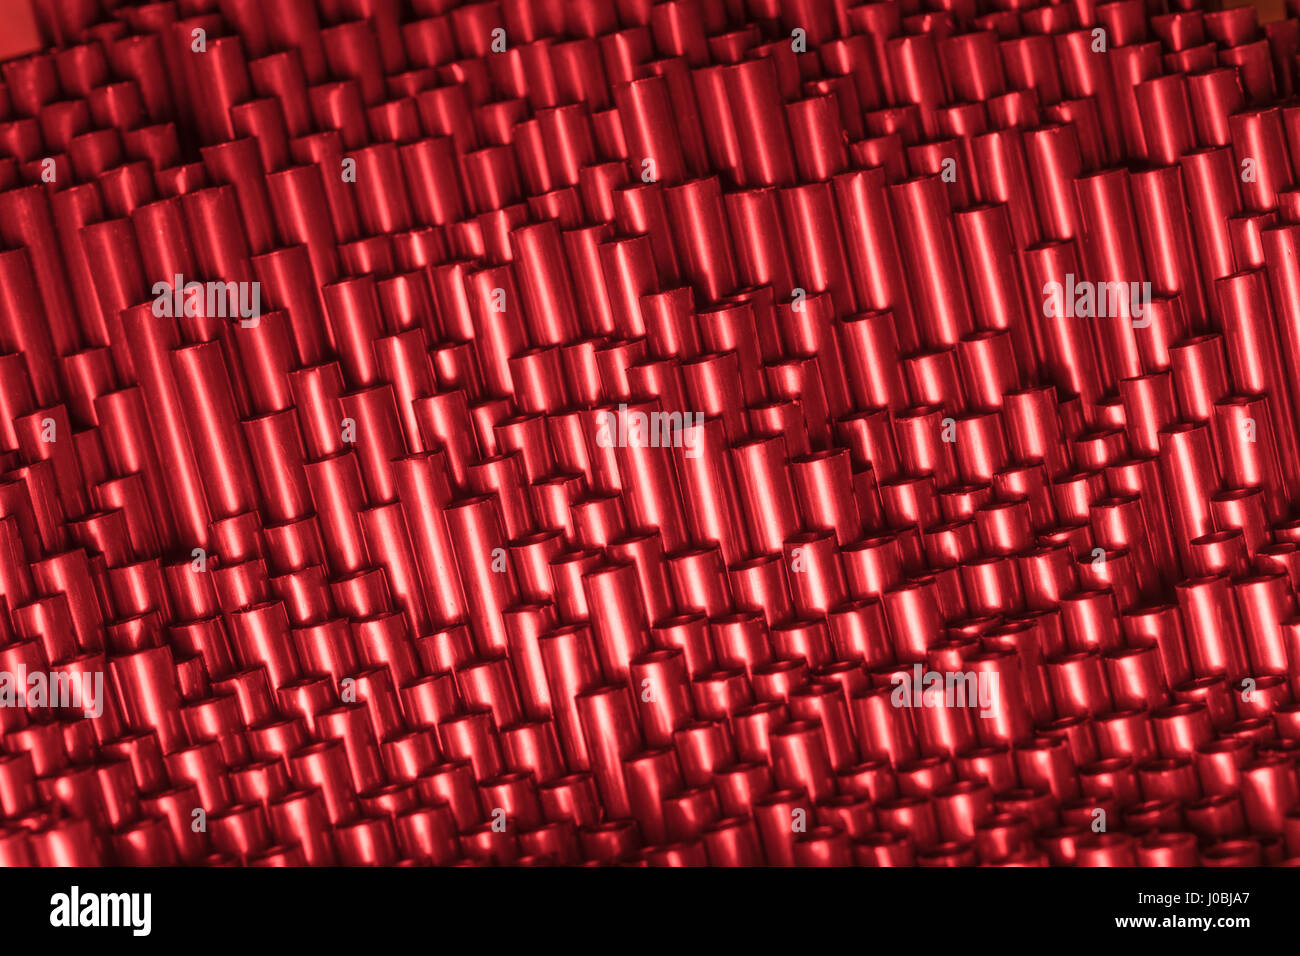 Abstract mass of black plastic drinking straws bathed in red light. Metaphor war on plastic straws, plastic uses, plastics. Abstract plastic texture. Stock Photo